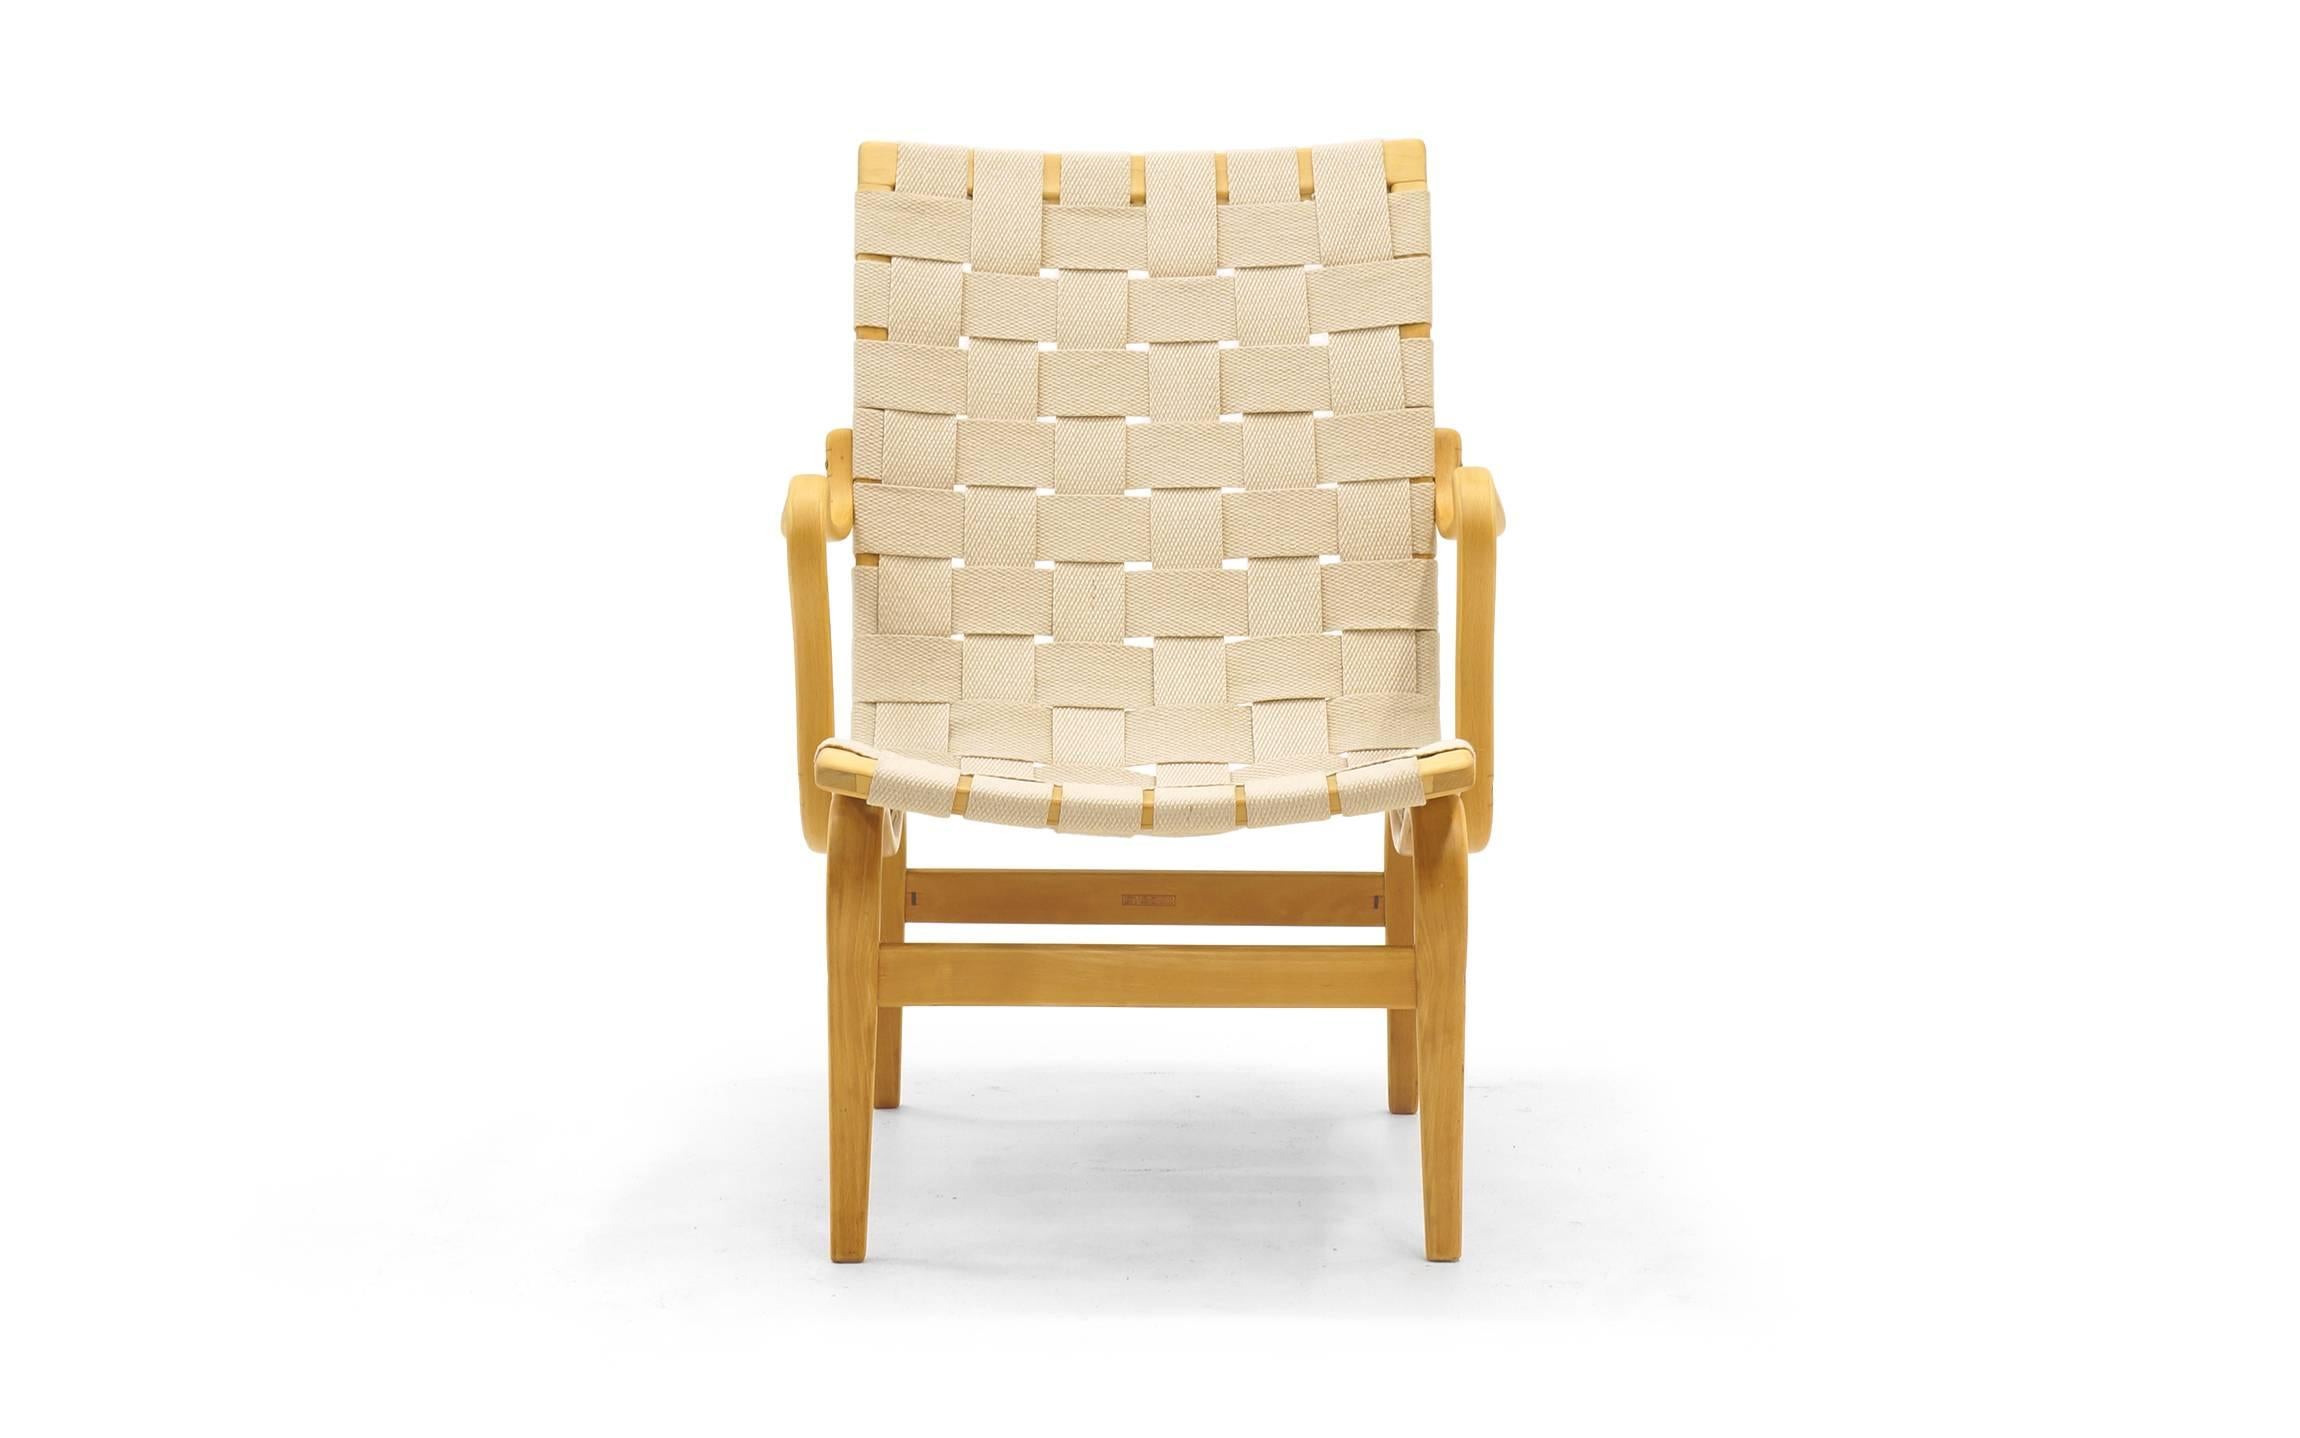 Eva armchair/lounge chair by Bruno Mathsson for Dux in excellent condition.